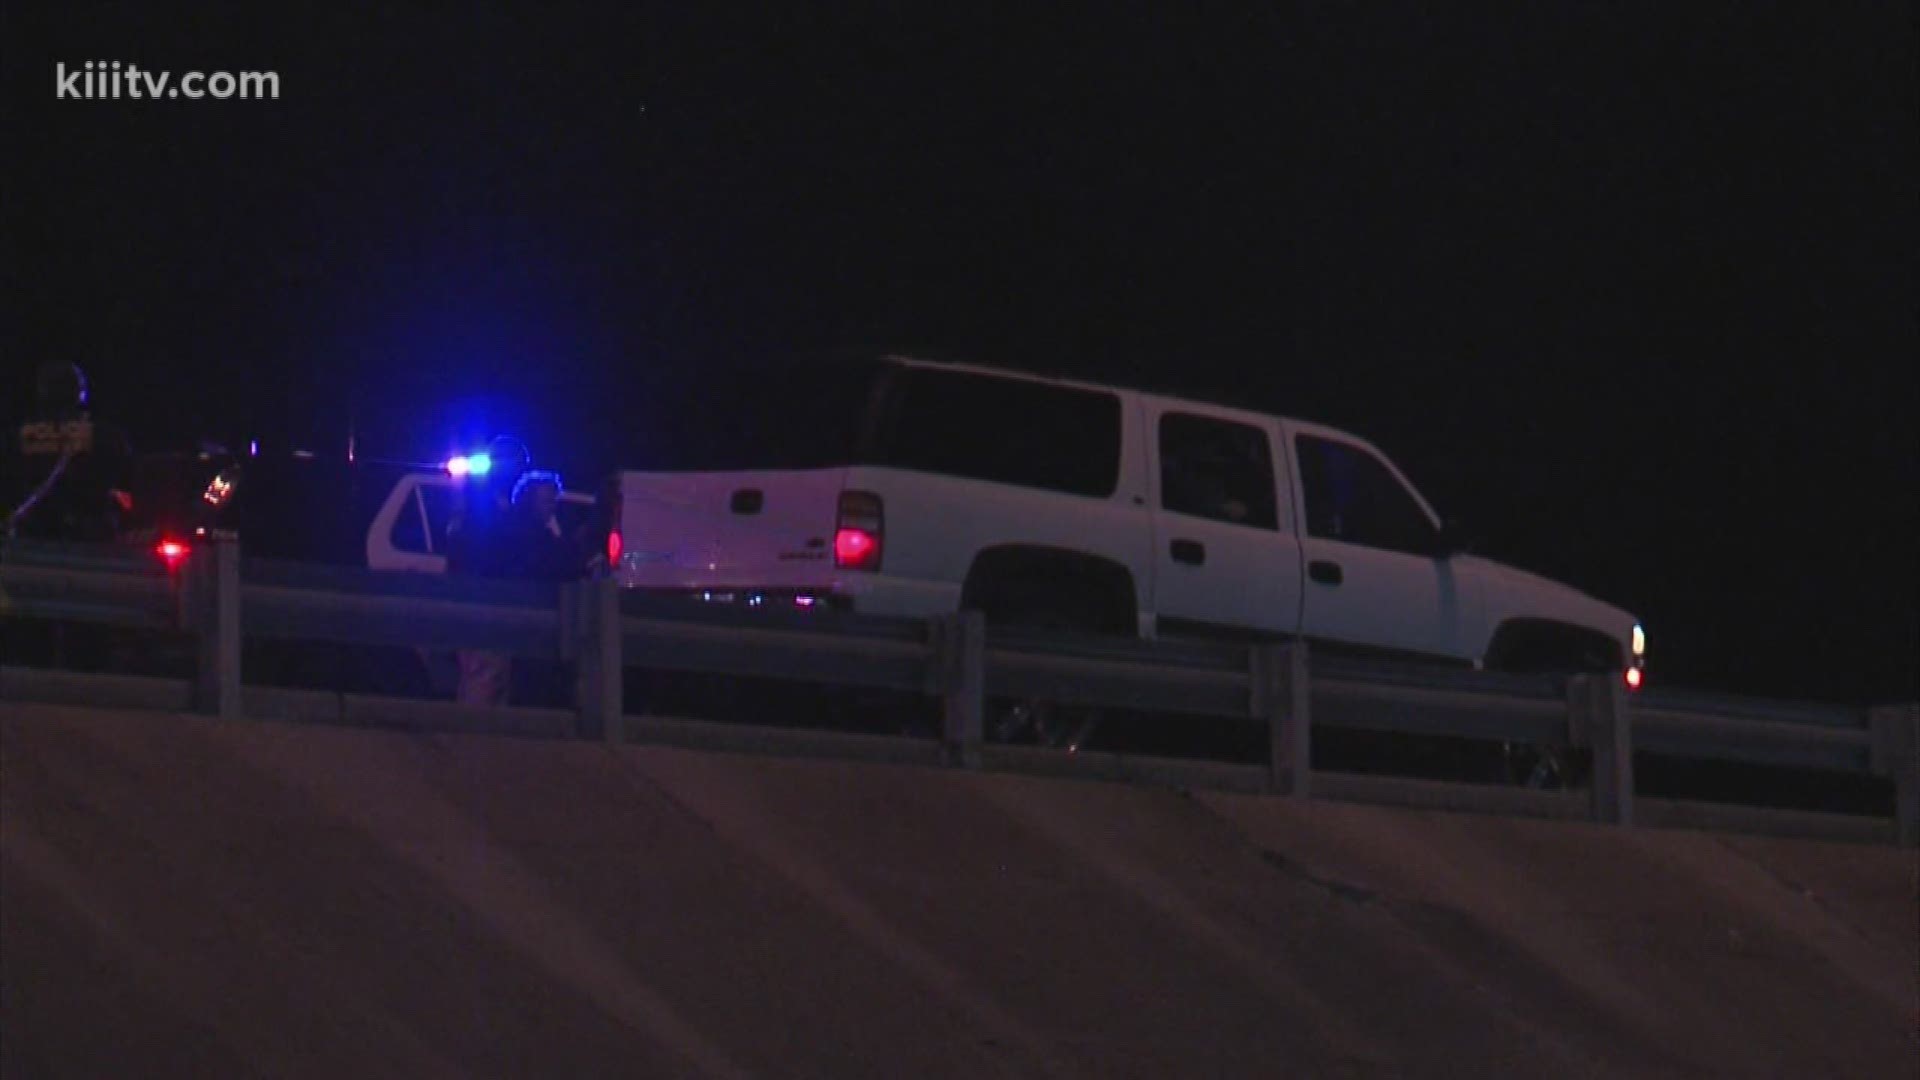 Police responded to the scene just after 2:30 a.m. to find a white SUV on the highway that had numerous bullet holes.